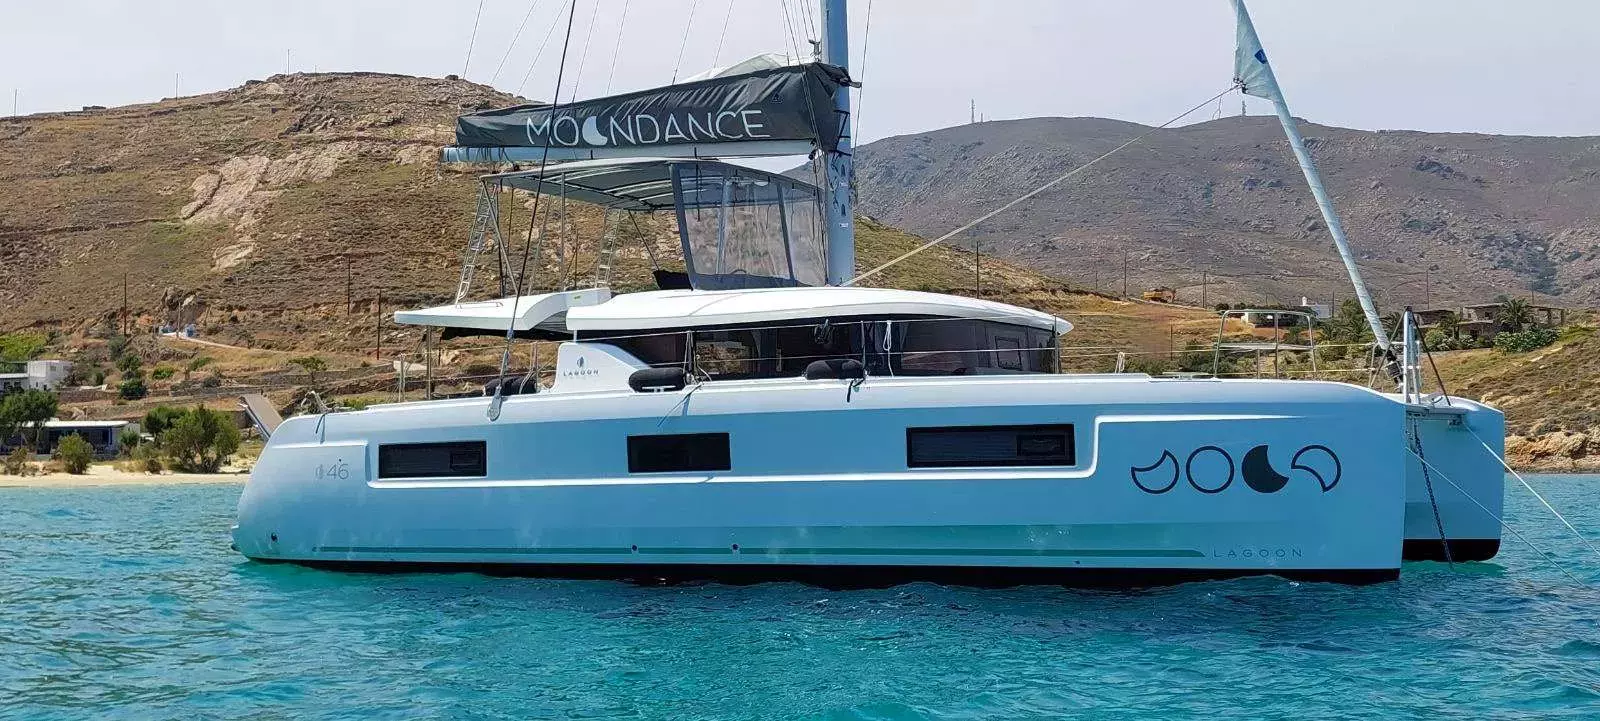 Moondance III by Lagoon - Special Offer for a private Power Catamaran Rental in Crete with a crew